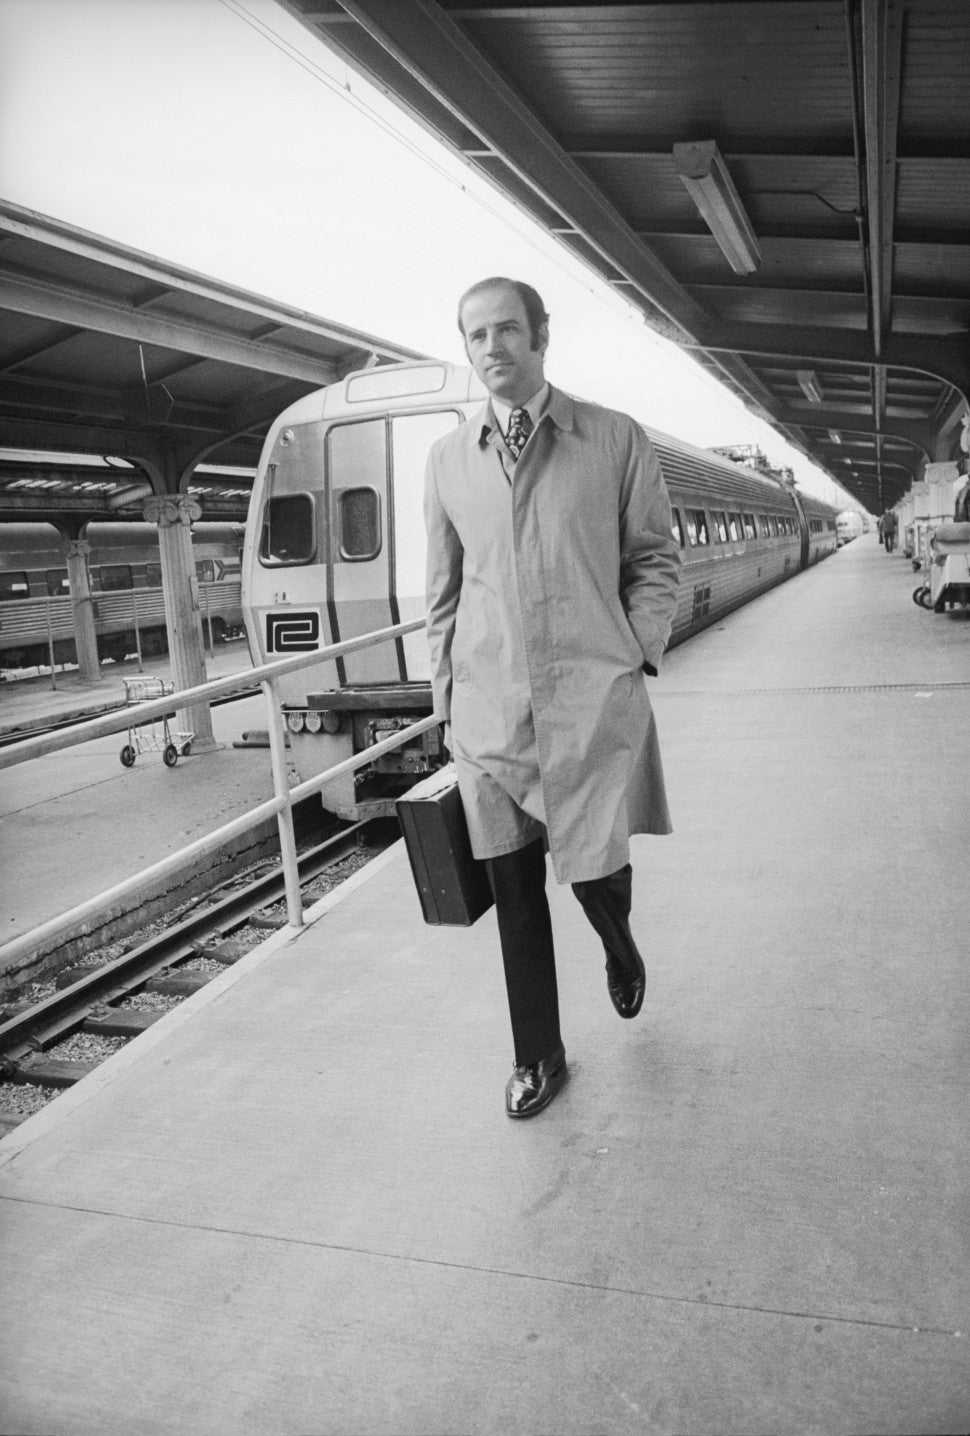 Joseph R. Biden, D-Del., is seen here at Union Station where most days, after the Senate adjourns, he catches the Metroliner to Wilmington for home. He makes the four-hour commute almost daily to be with his motherless sons Beau, 4, and Hunter, 3. 